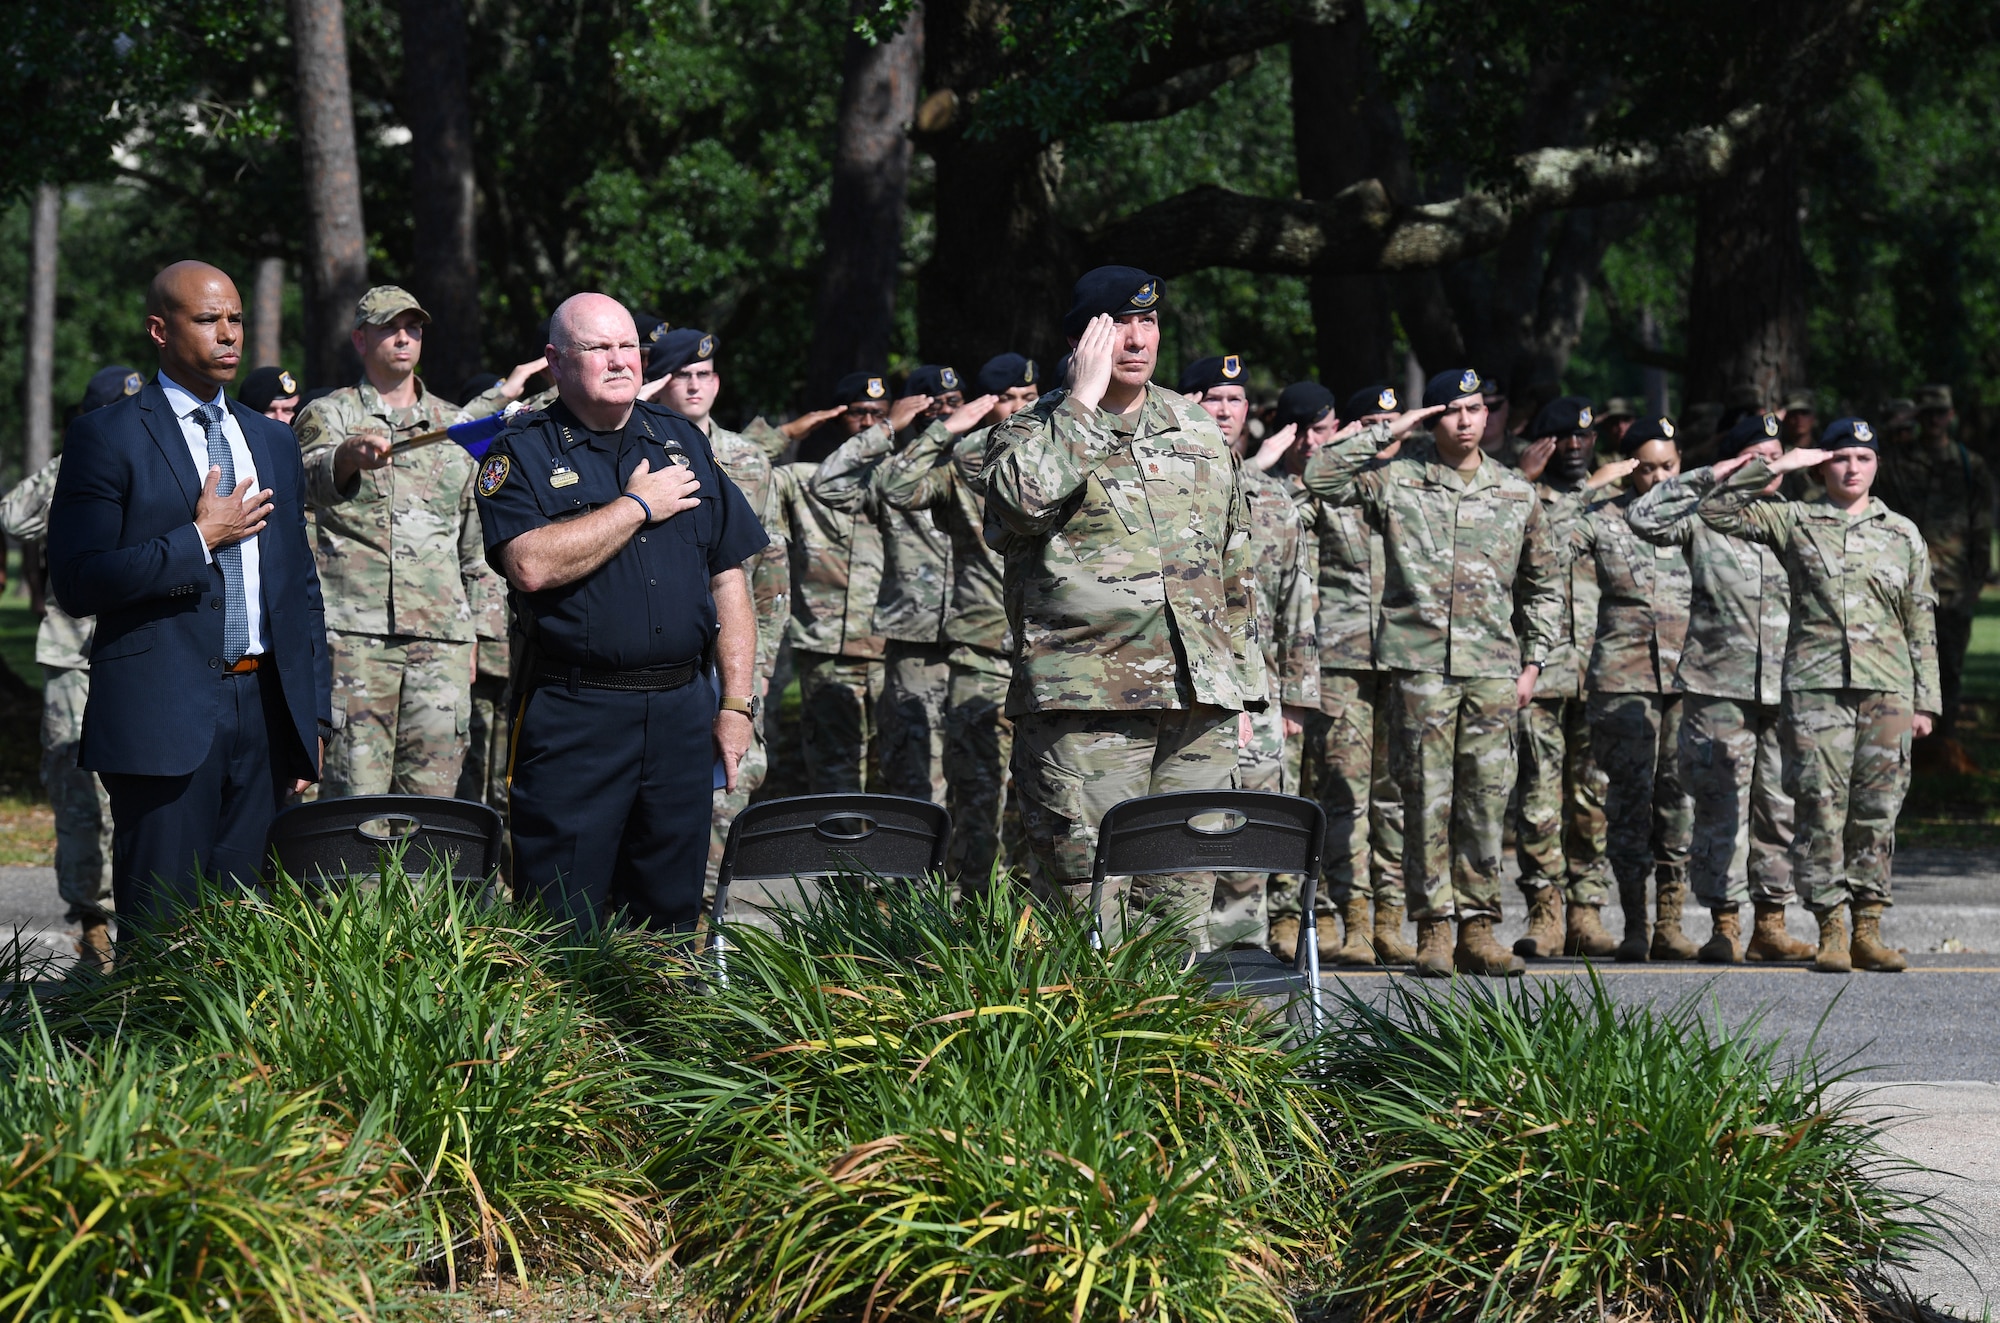 Members of the 81st Security Forces Squadron and local law enforcement agencies attend a retreat ceremony at Keesler Air Force Base, Mississippi, May 20, 2022. The ceremony, hosted by the 81st SFS, was the last of several events held in celebration of this year's Police Week. (U.S. Air Force photo by Kemberly Groue)